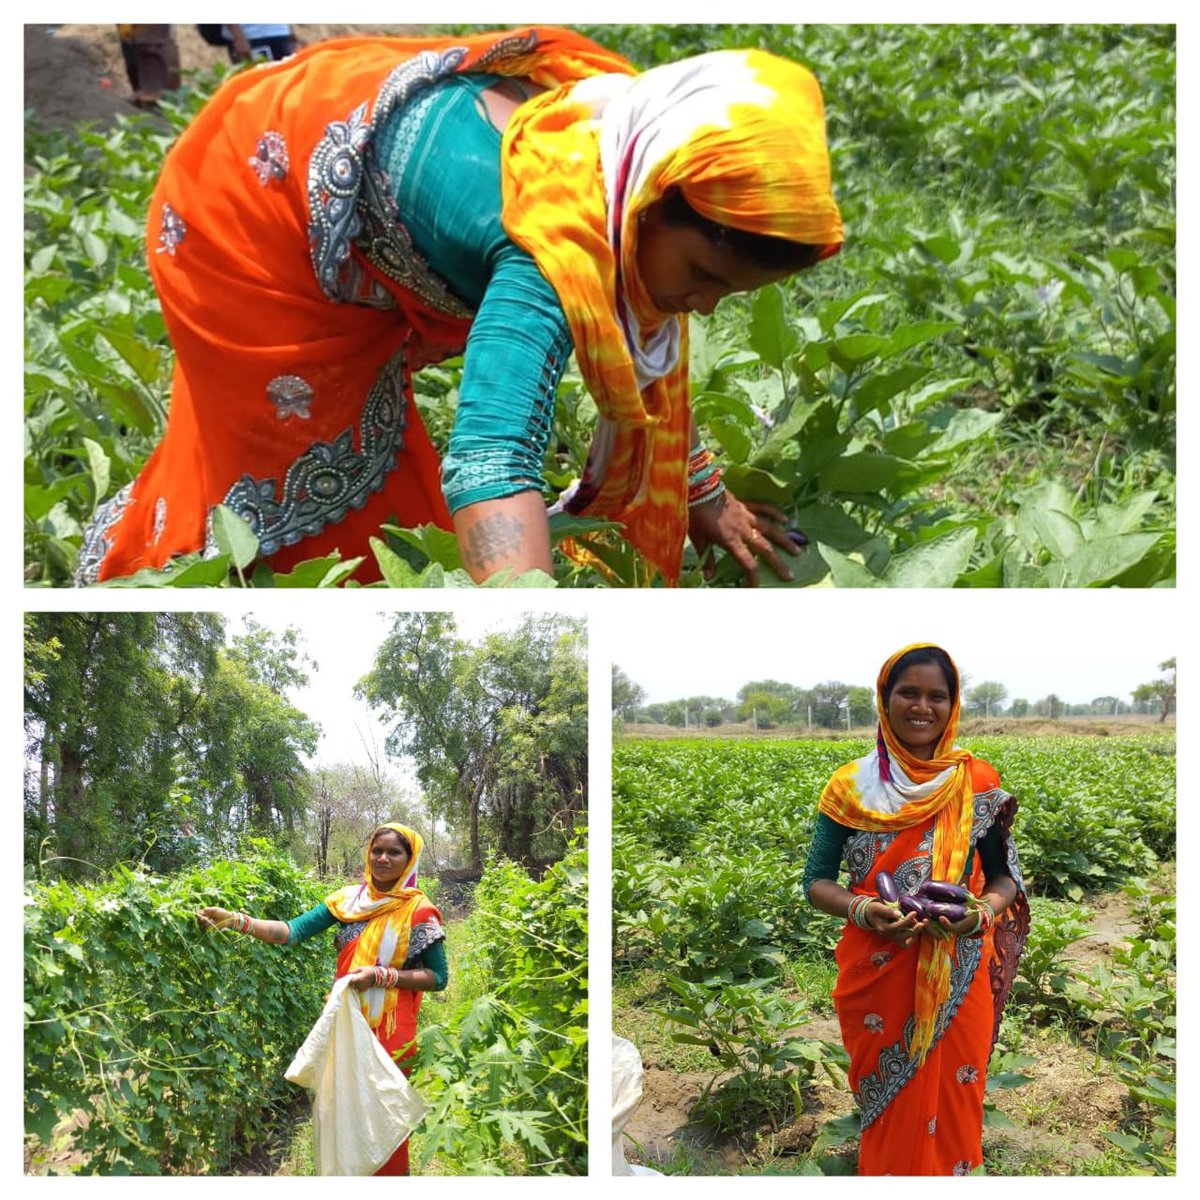 Meet Pratima Kharsel from Dungriguda village. Once a migrant worker, she transformed into a successful farmer through NYDHEE's Mpowered project. With training and support, she now earns ₹50,000 from diverse crops. An inspiring story of empowerment and sustainable agriculture.